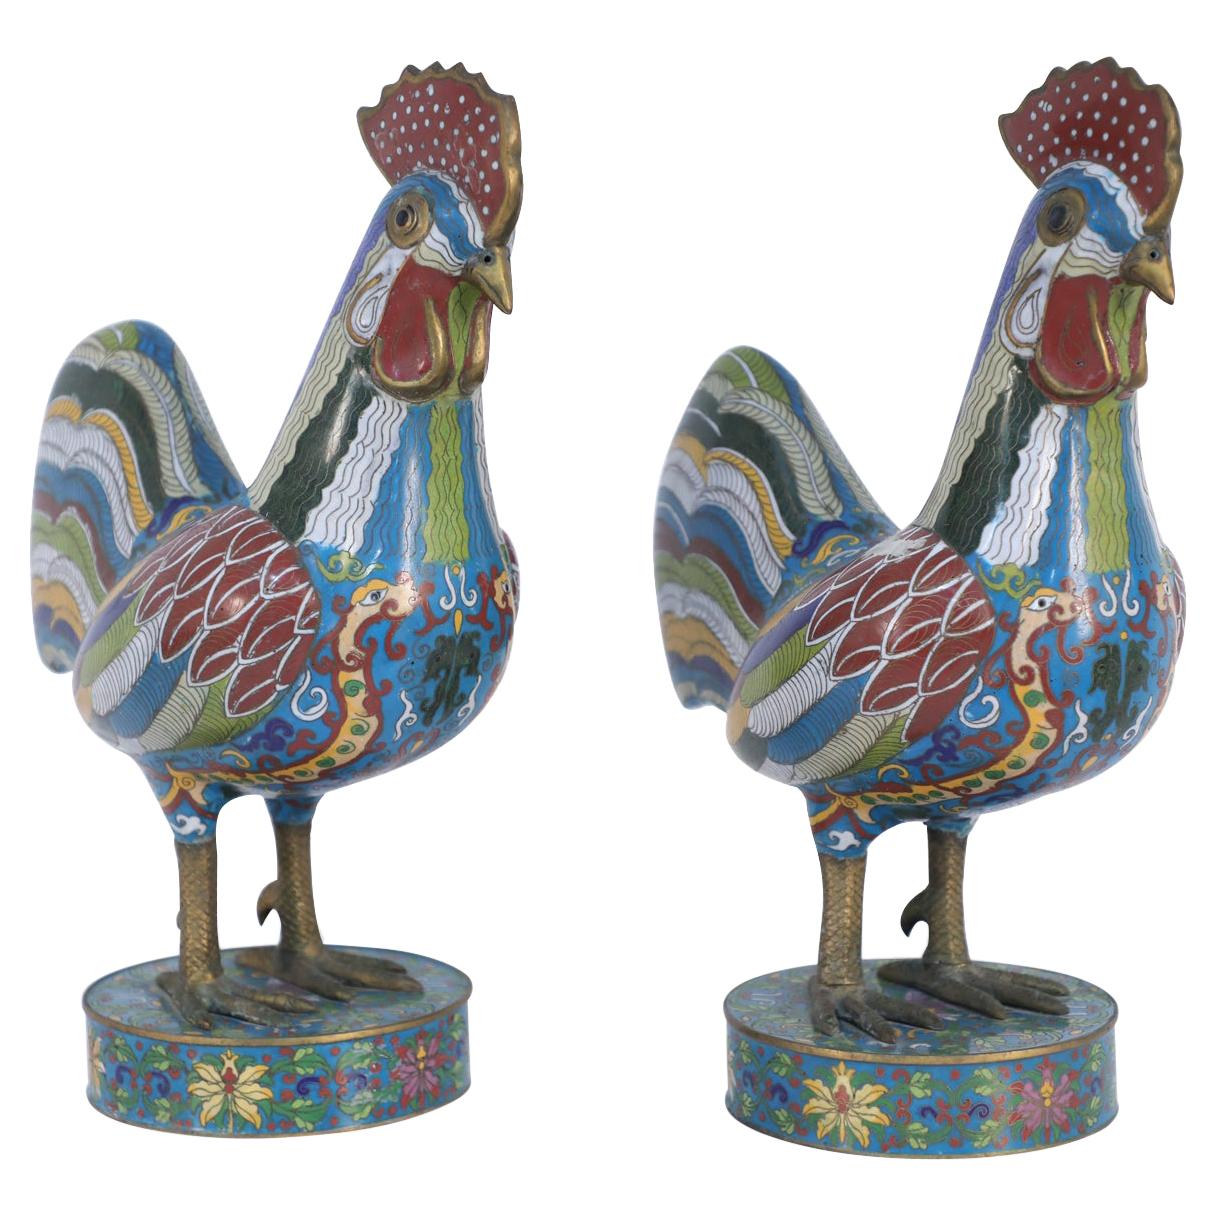 Pair of Early 20th Century Chinese Multi-Colored Cloisonne Rooster Sculptures For Sale